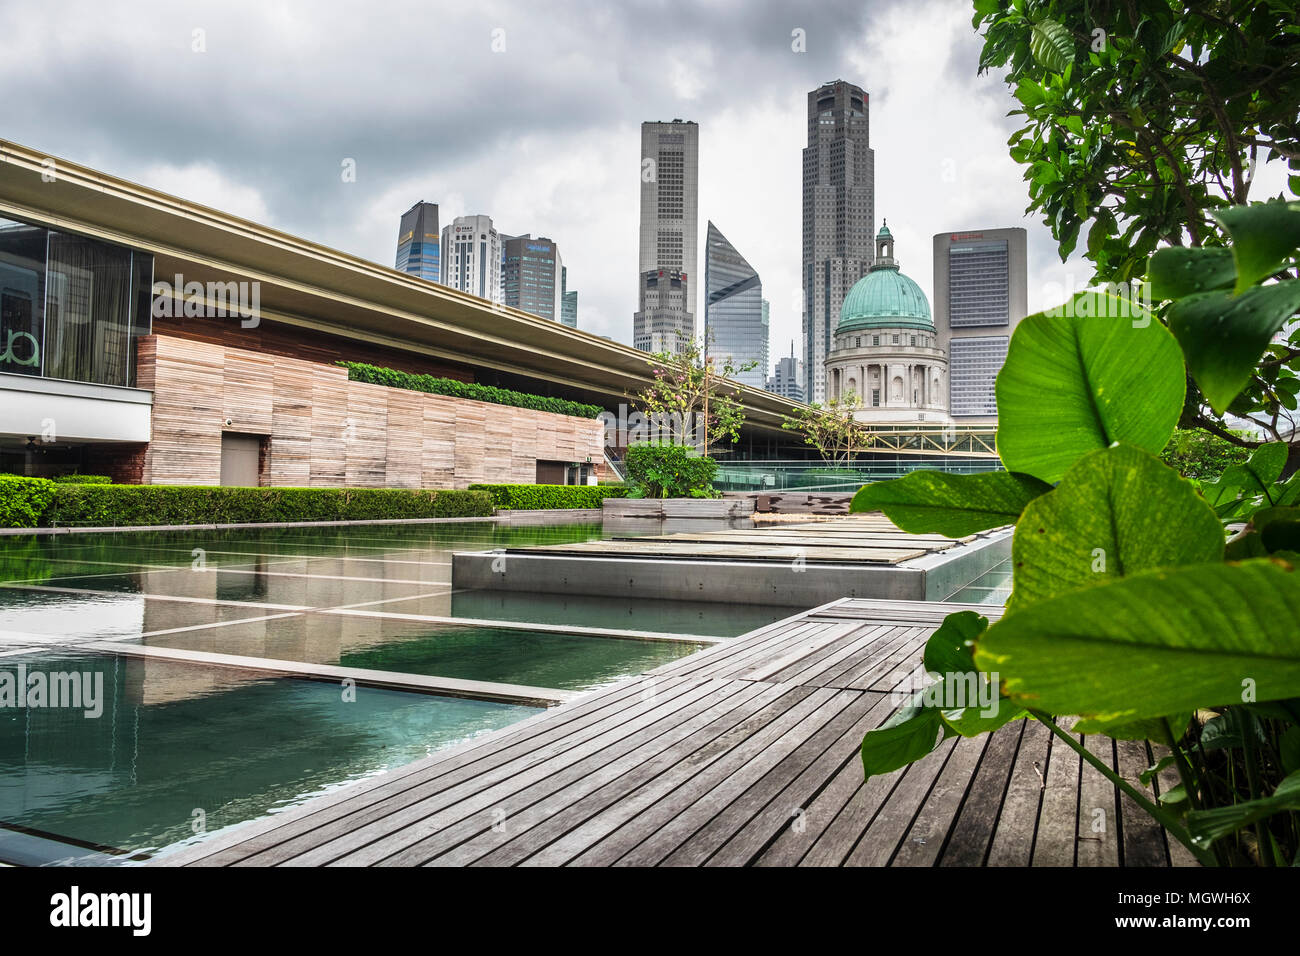 Rooftop garden, National Gallery of Singapore, with city buildings in background, Singapore Stock Photo